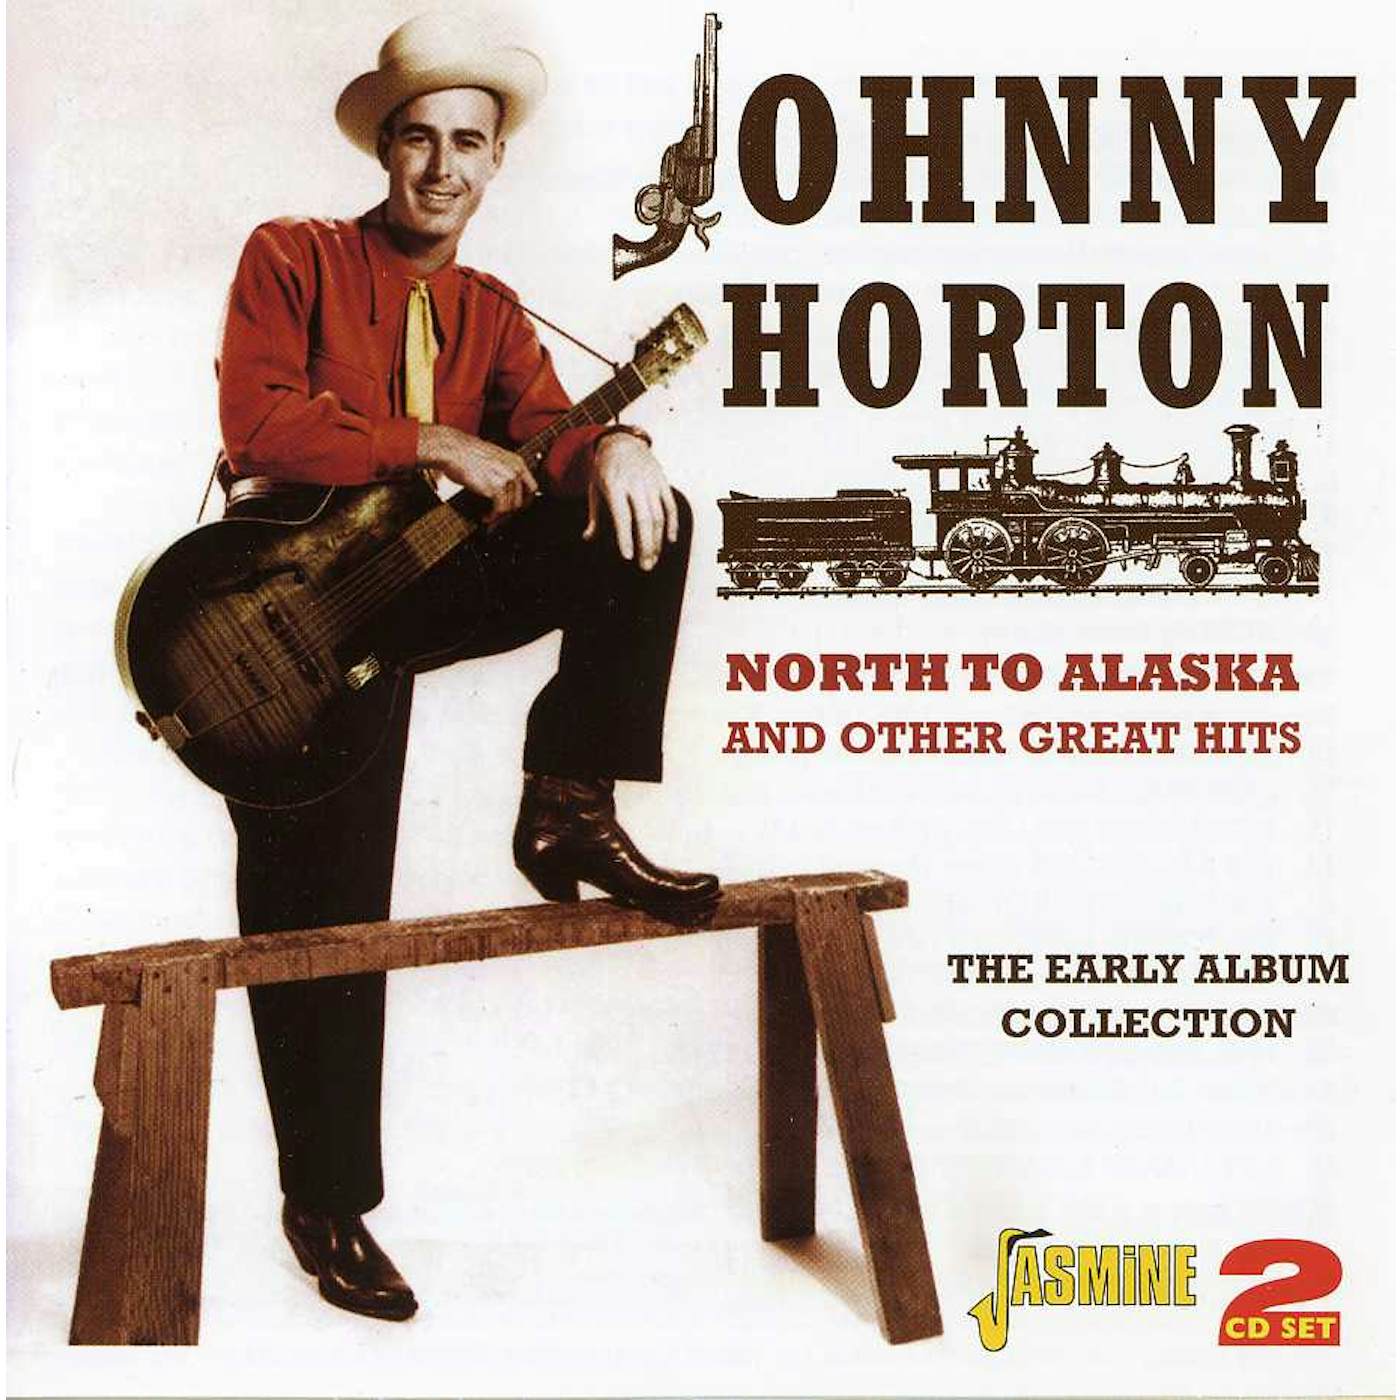 Johnny Horton NORTH TO ALASKA & OTHER GREAT HITS CD